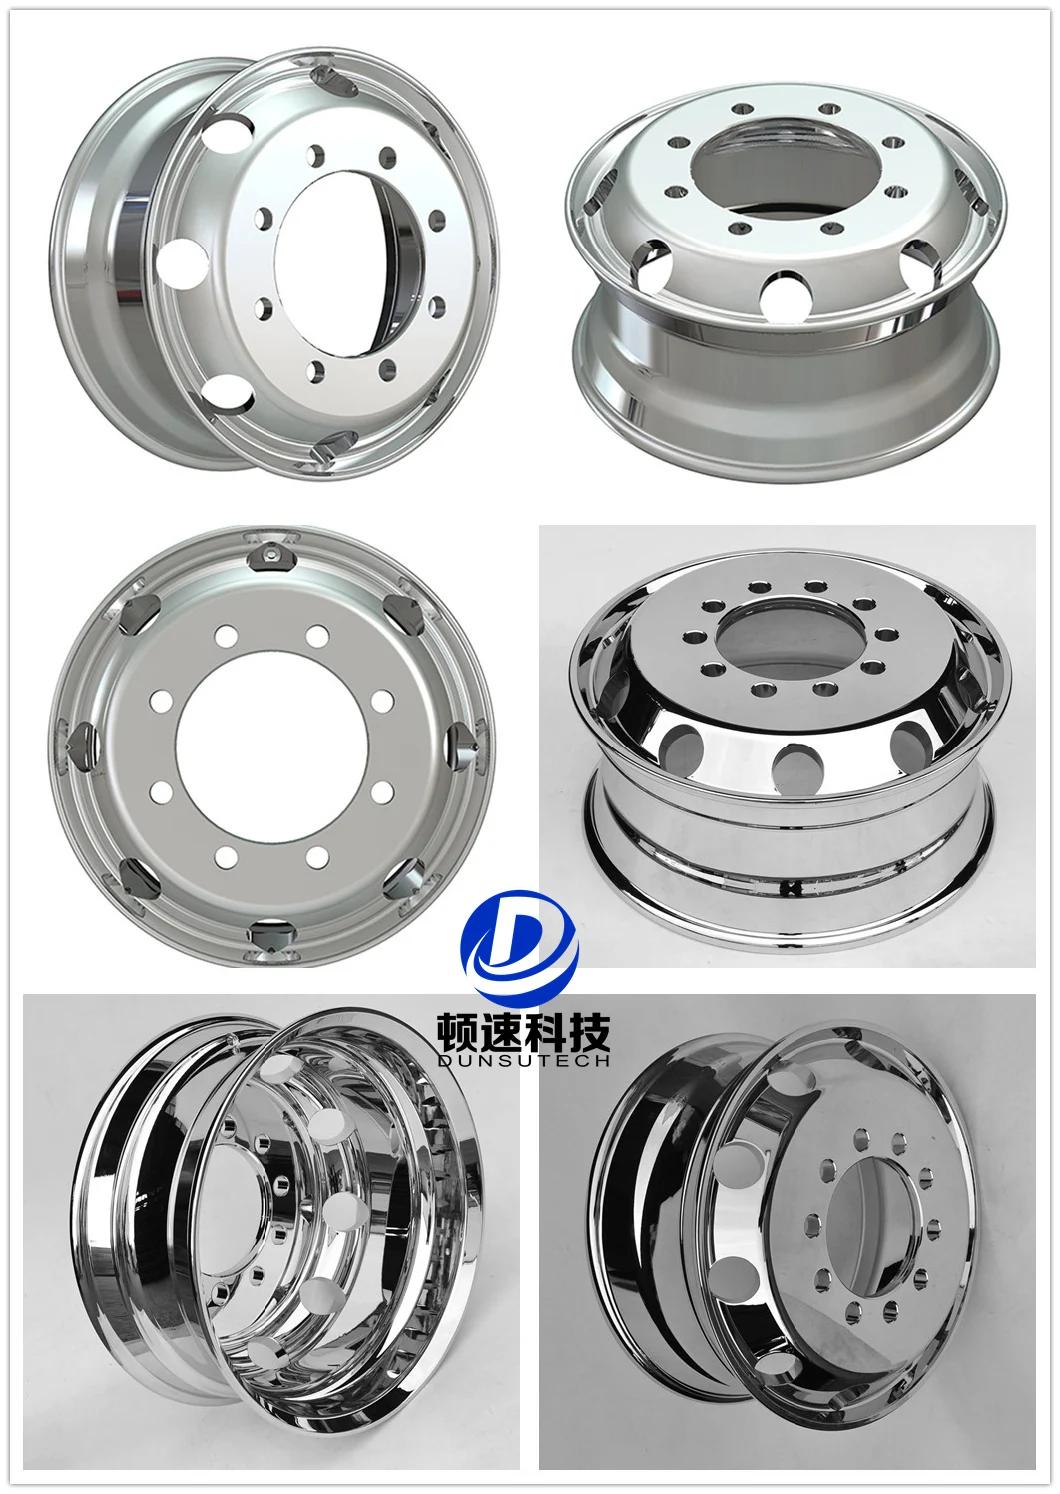 Make in China Chrome Wire Wheels Truck Auto Parts Car Accessories Wheel Rims Alloy Wheels Alloy Rims Car Spare Parts